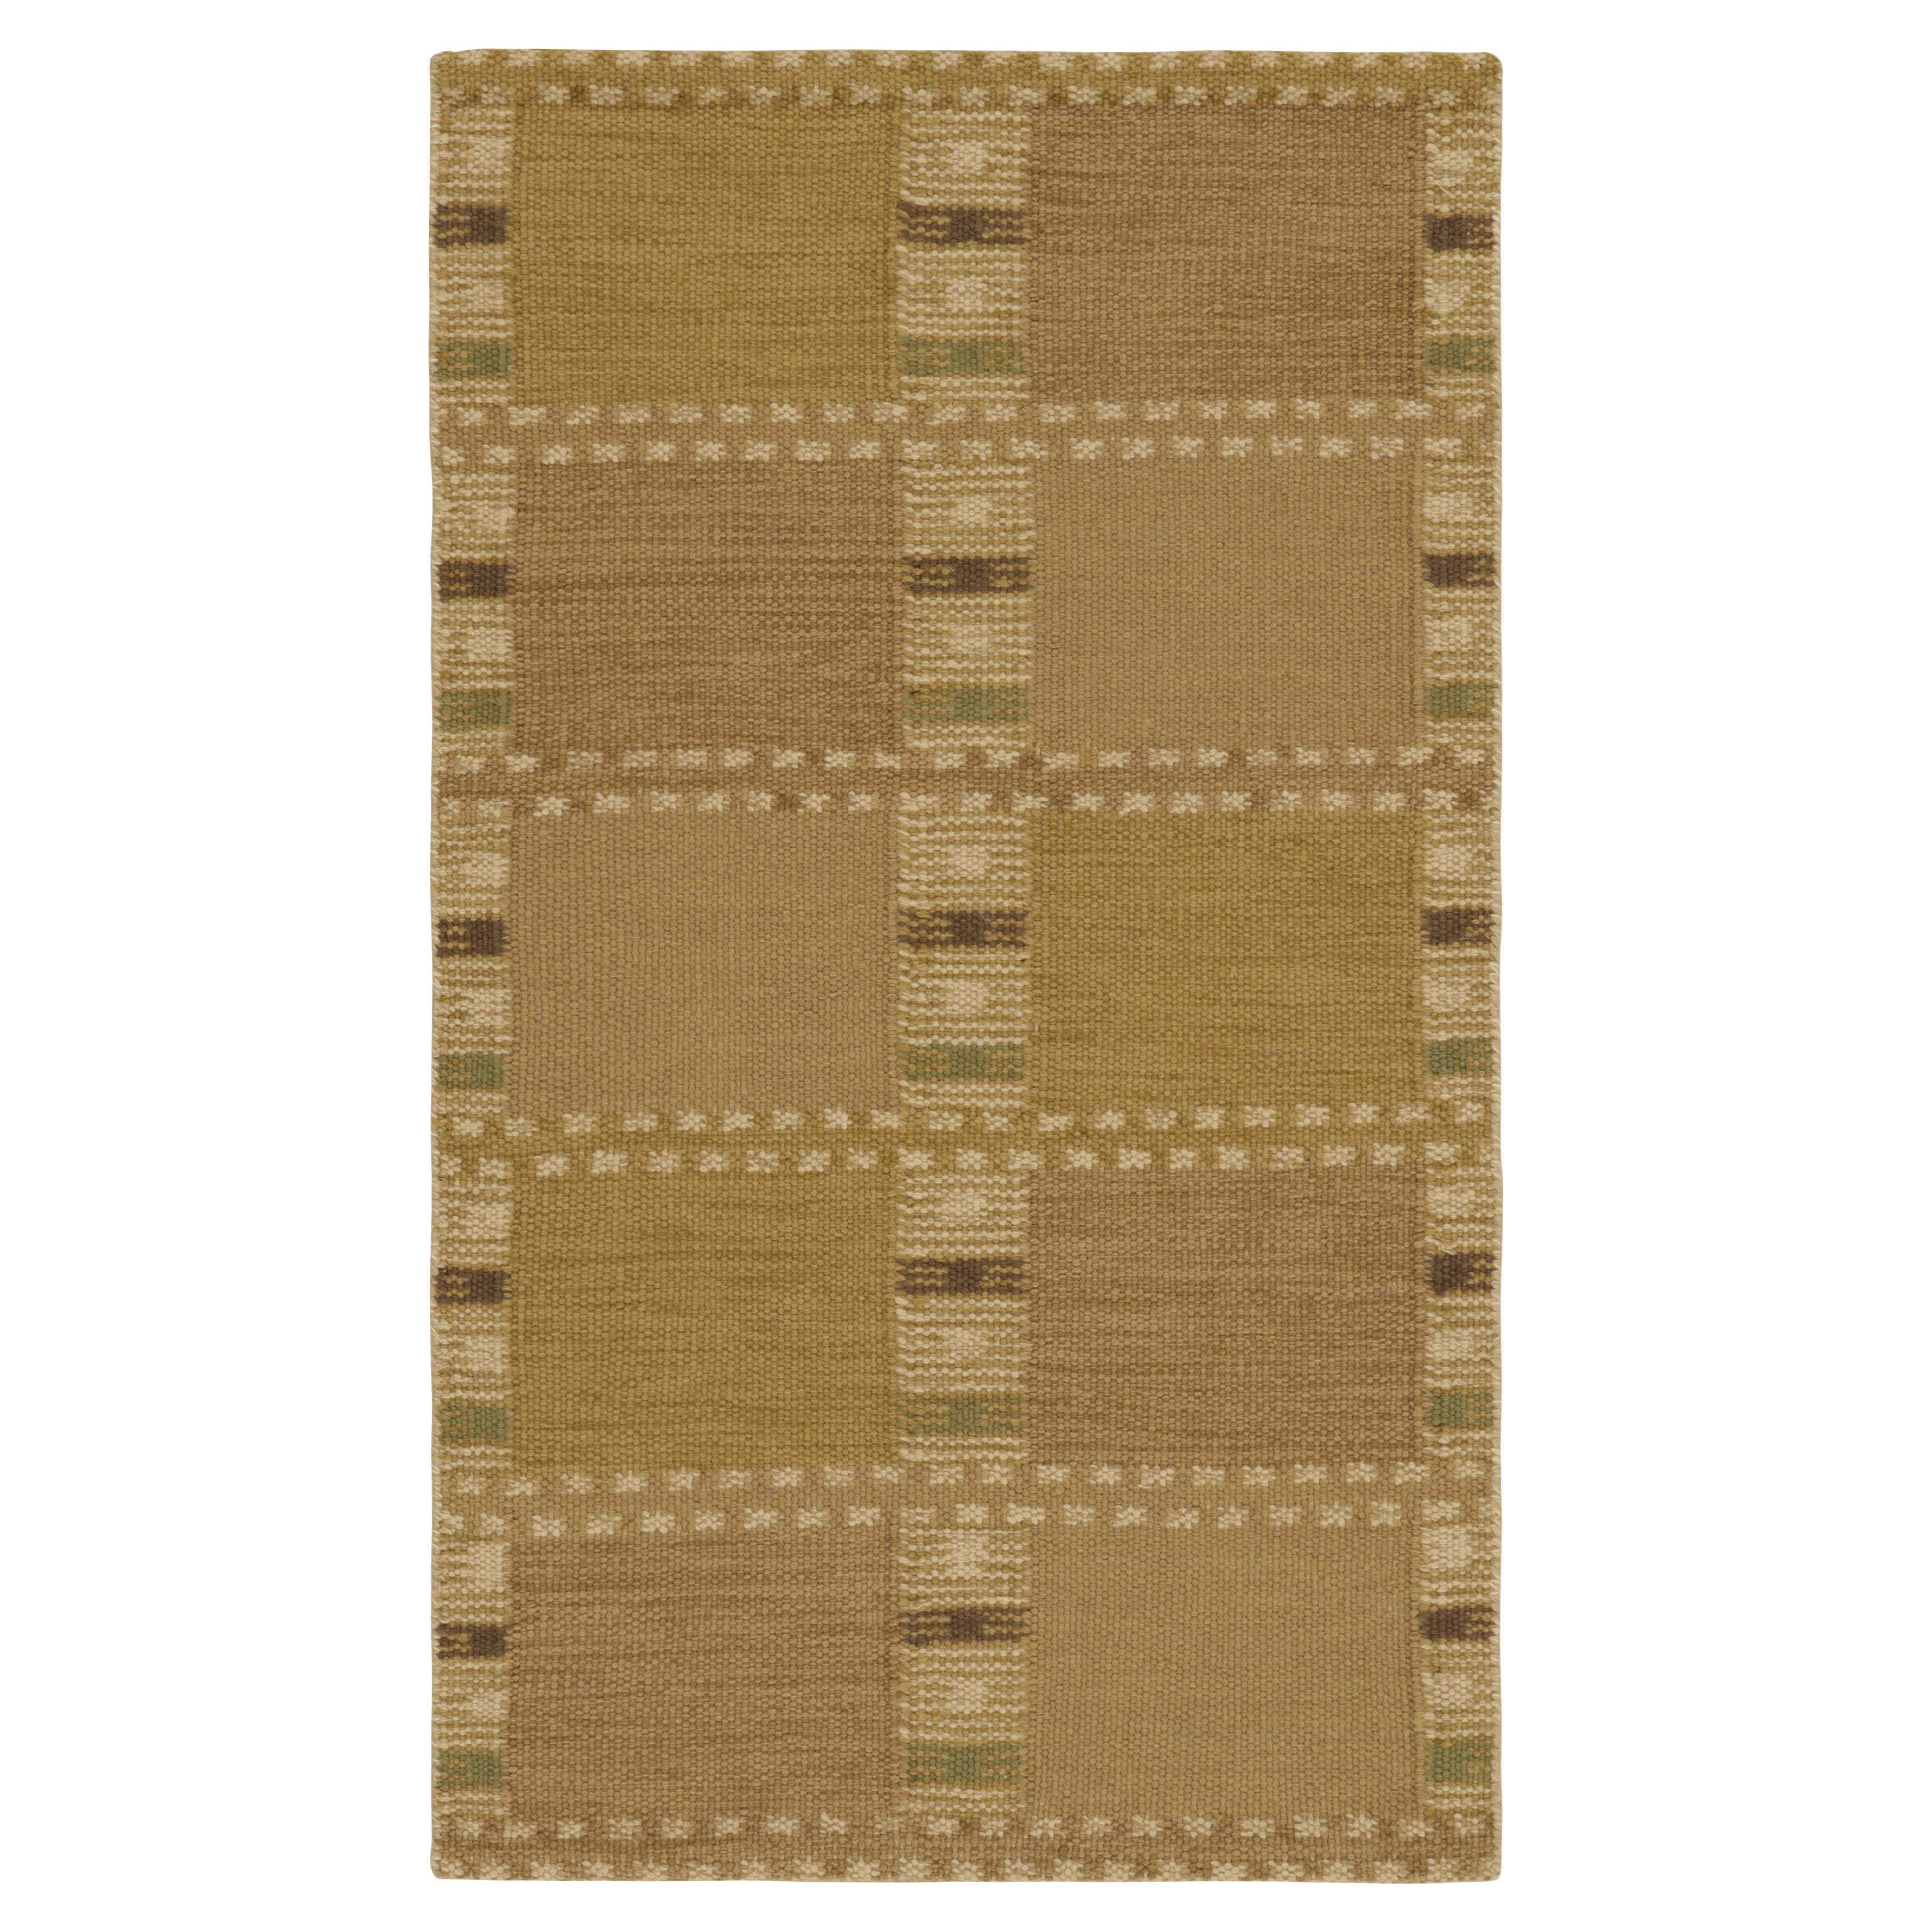 Rug & Kilim’s Scandinavian Style Rug in Gold, with Geometric Patterns